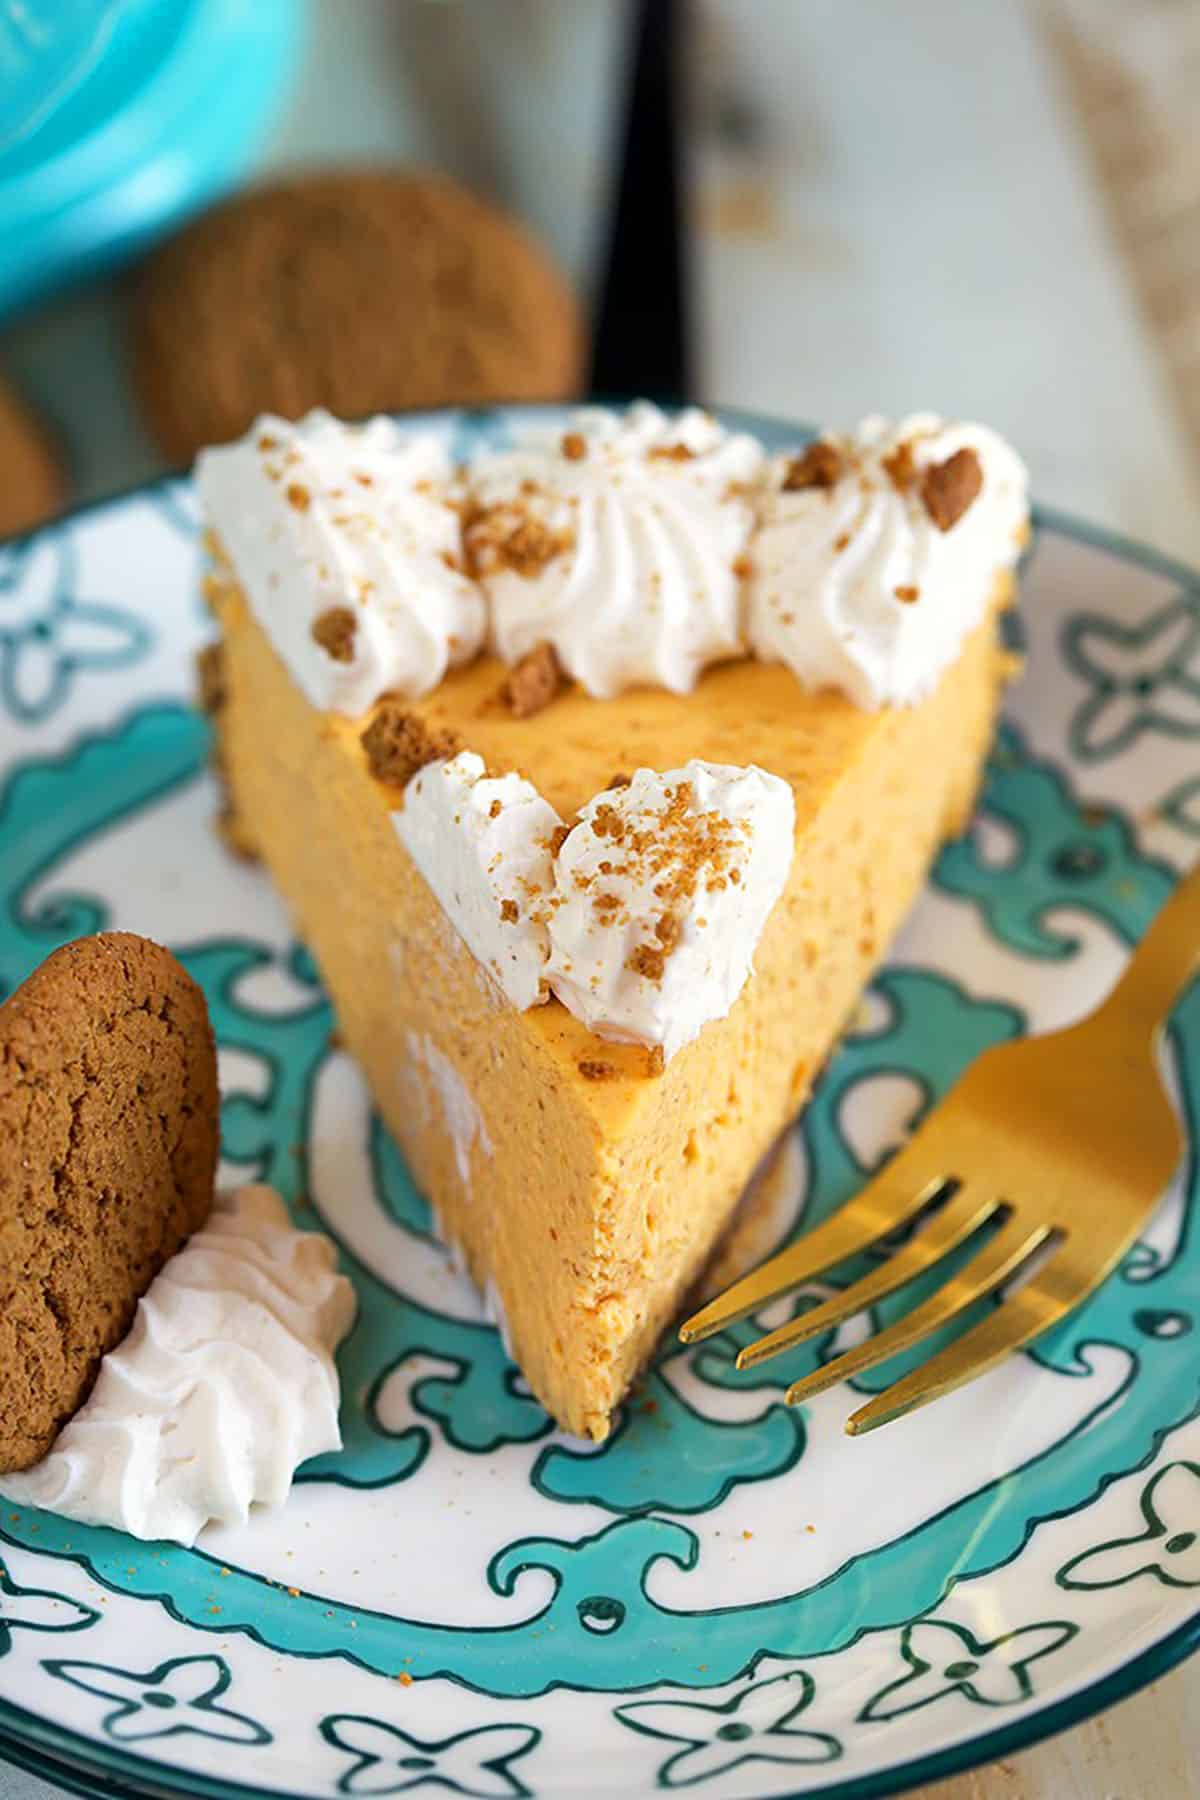 Slice of Pumpkin cheesecake on a decorative plate with a gold fork.